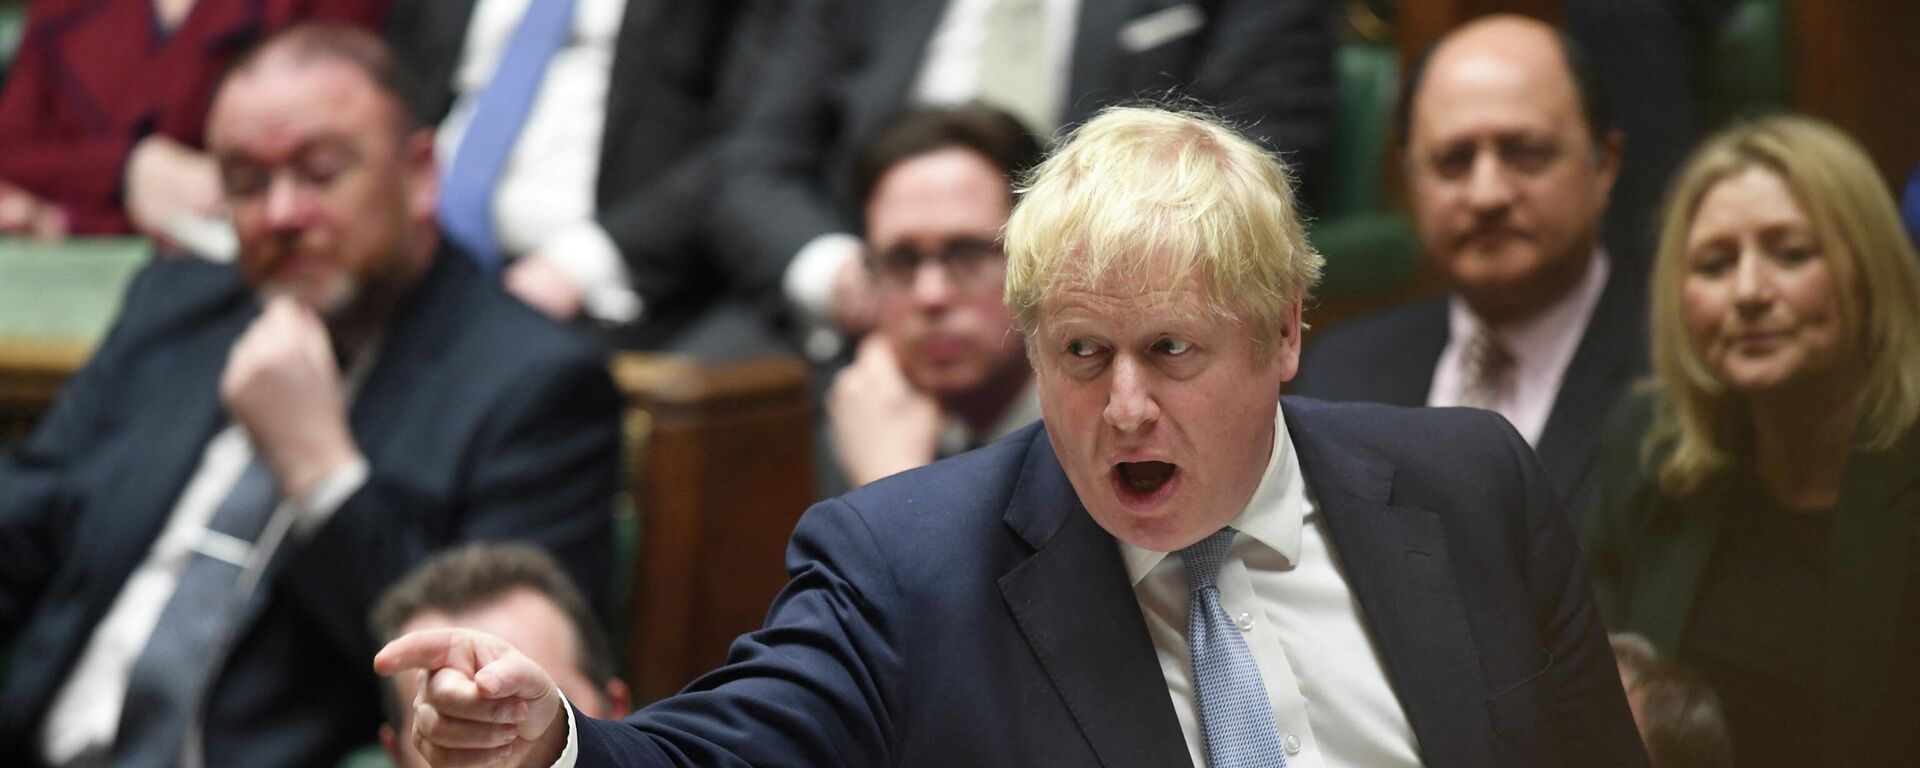 British Prime Minister Boris Johnson makes a statement on Sue Gray's report regarding the alleged Downing Street parties during COVID-19 lockdown, in the House of Commons in London, Britain, January 31, 2022 - Sputnik International, 1920, 01.02.2022